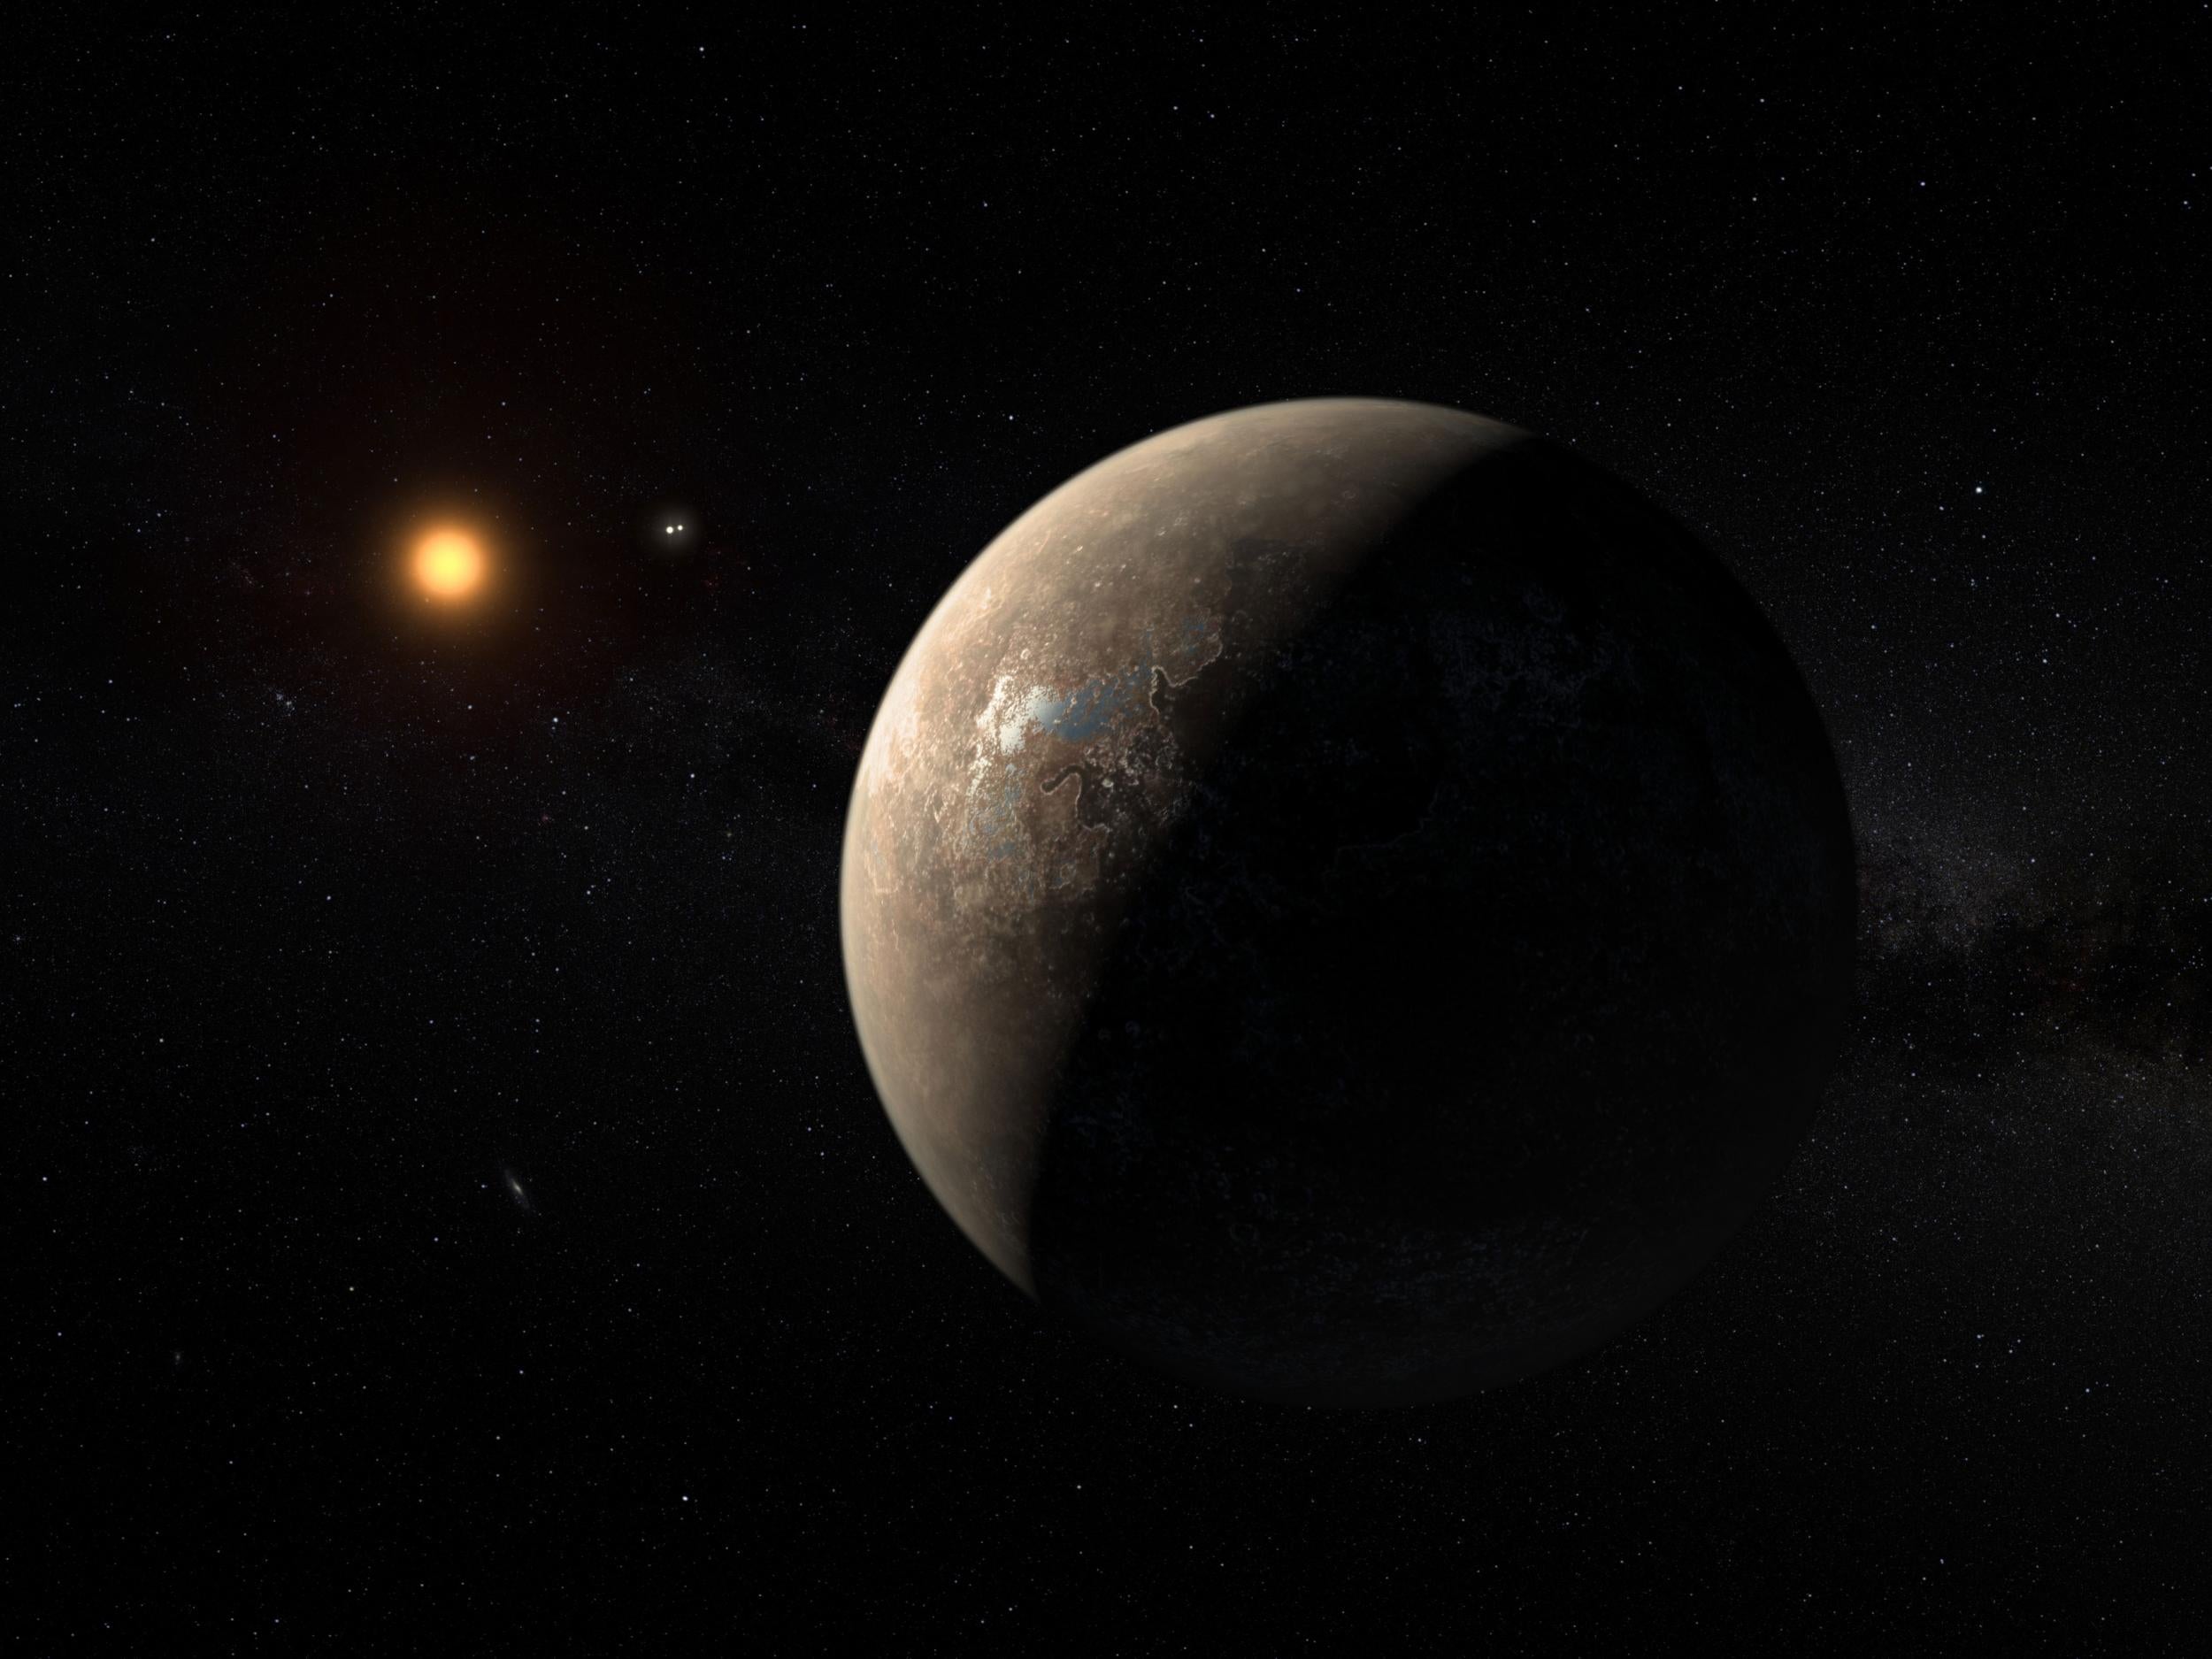 An artist's impression of the planet Proxima b orbiting the red dwarf star Proxima Centauri, the closest star to the Solar System